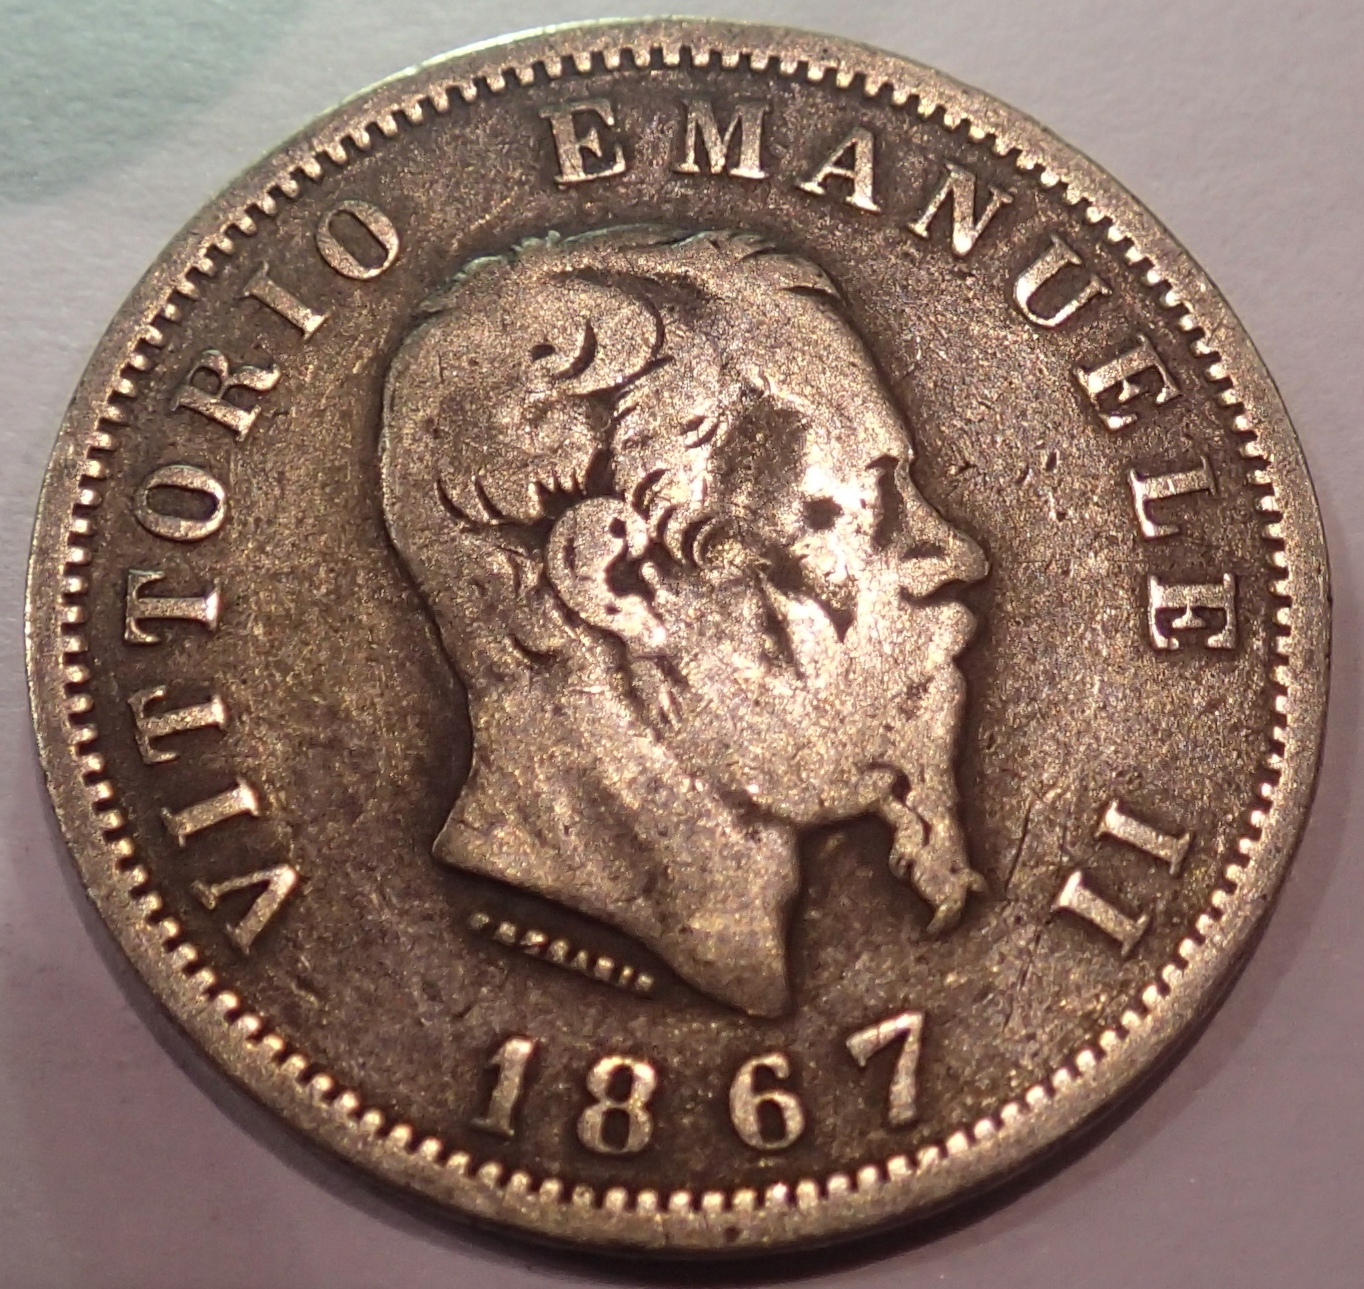 1867 - Silver 1 Lira - Italy. P&P Group 1 (£14+VAT for the first lot and £1+VAT for subsequent lots)